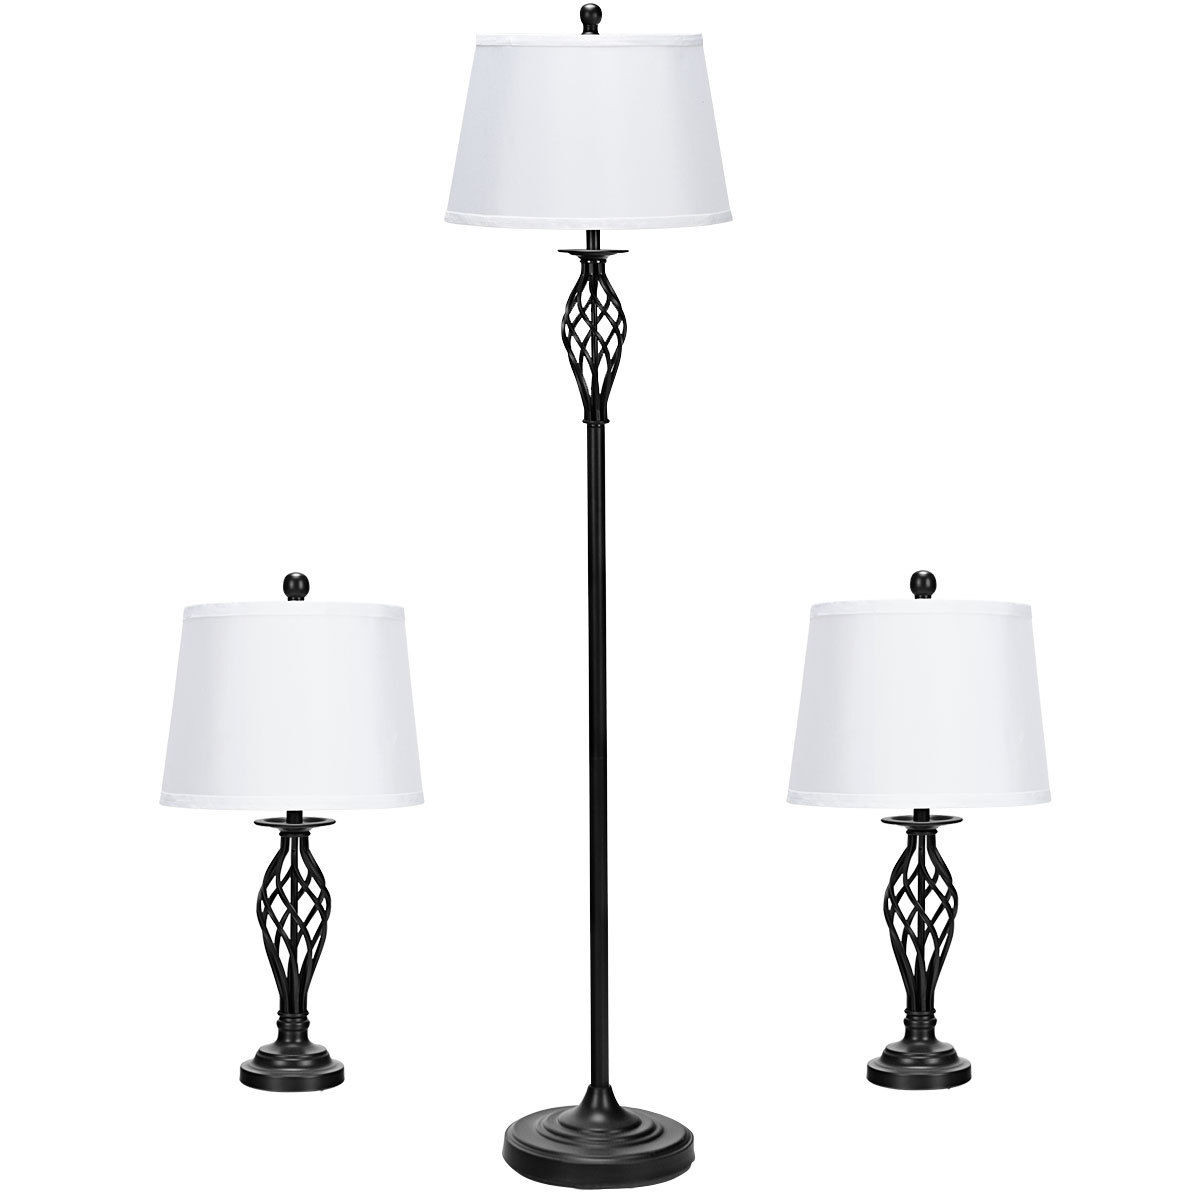 Living Room Lamp Shades
 Gymax 3 Piece Lamp Set 2 Table Lamps 1 Floor Lamp Fabric